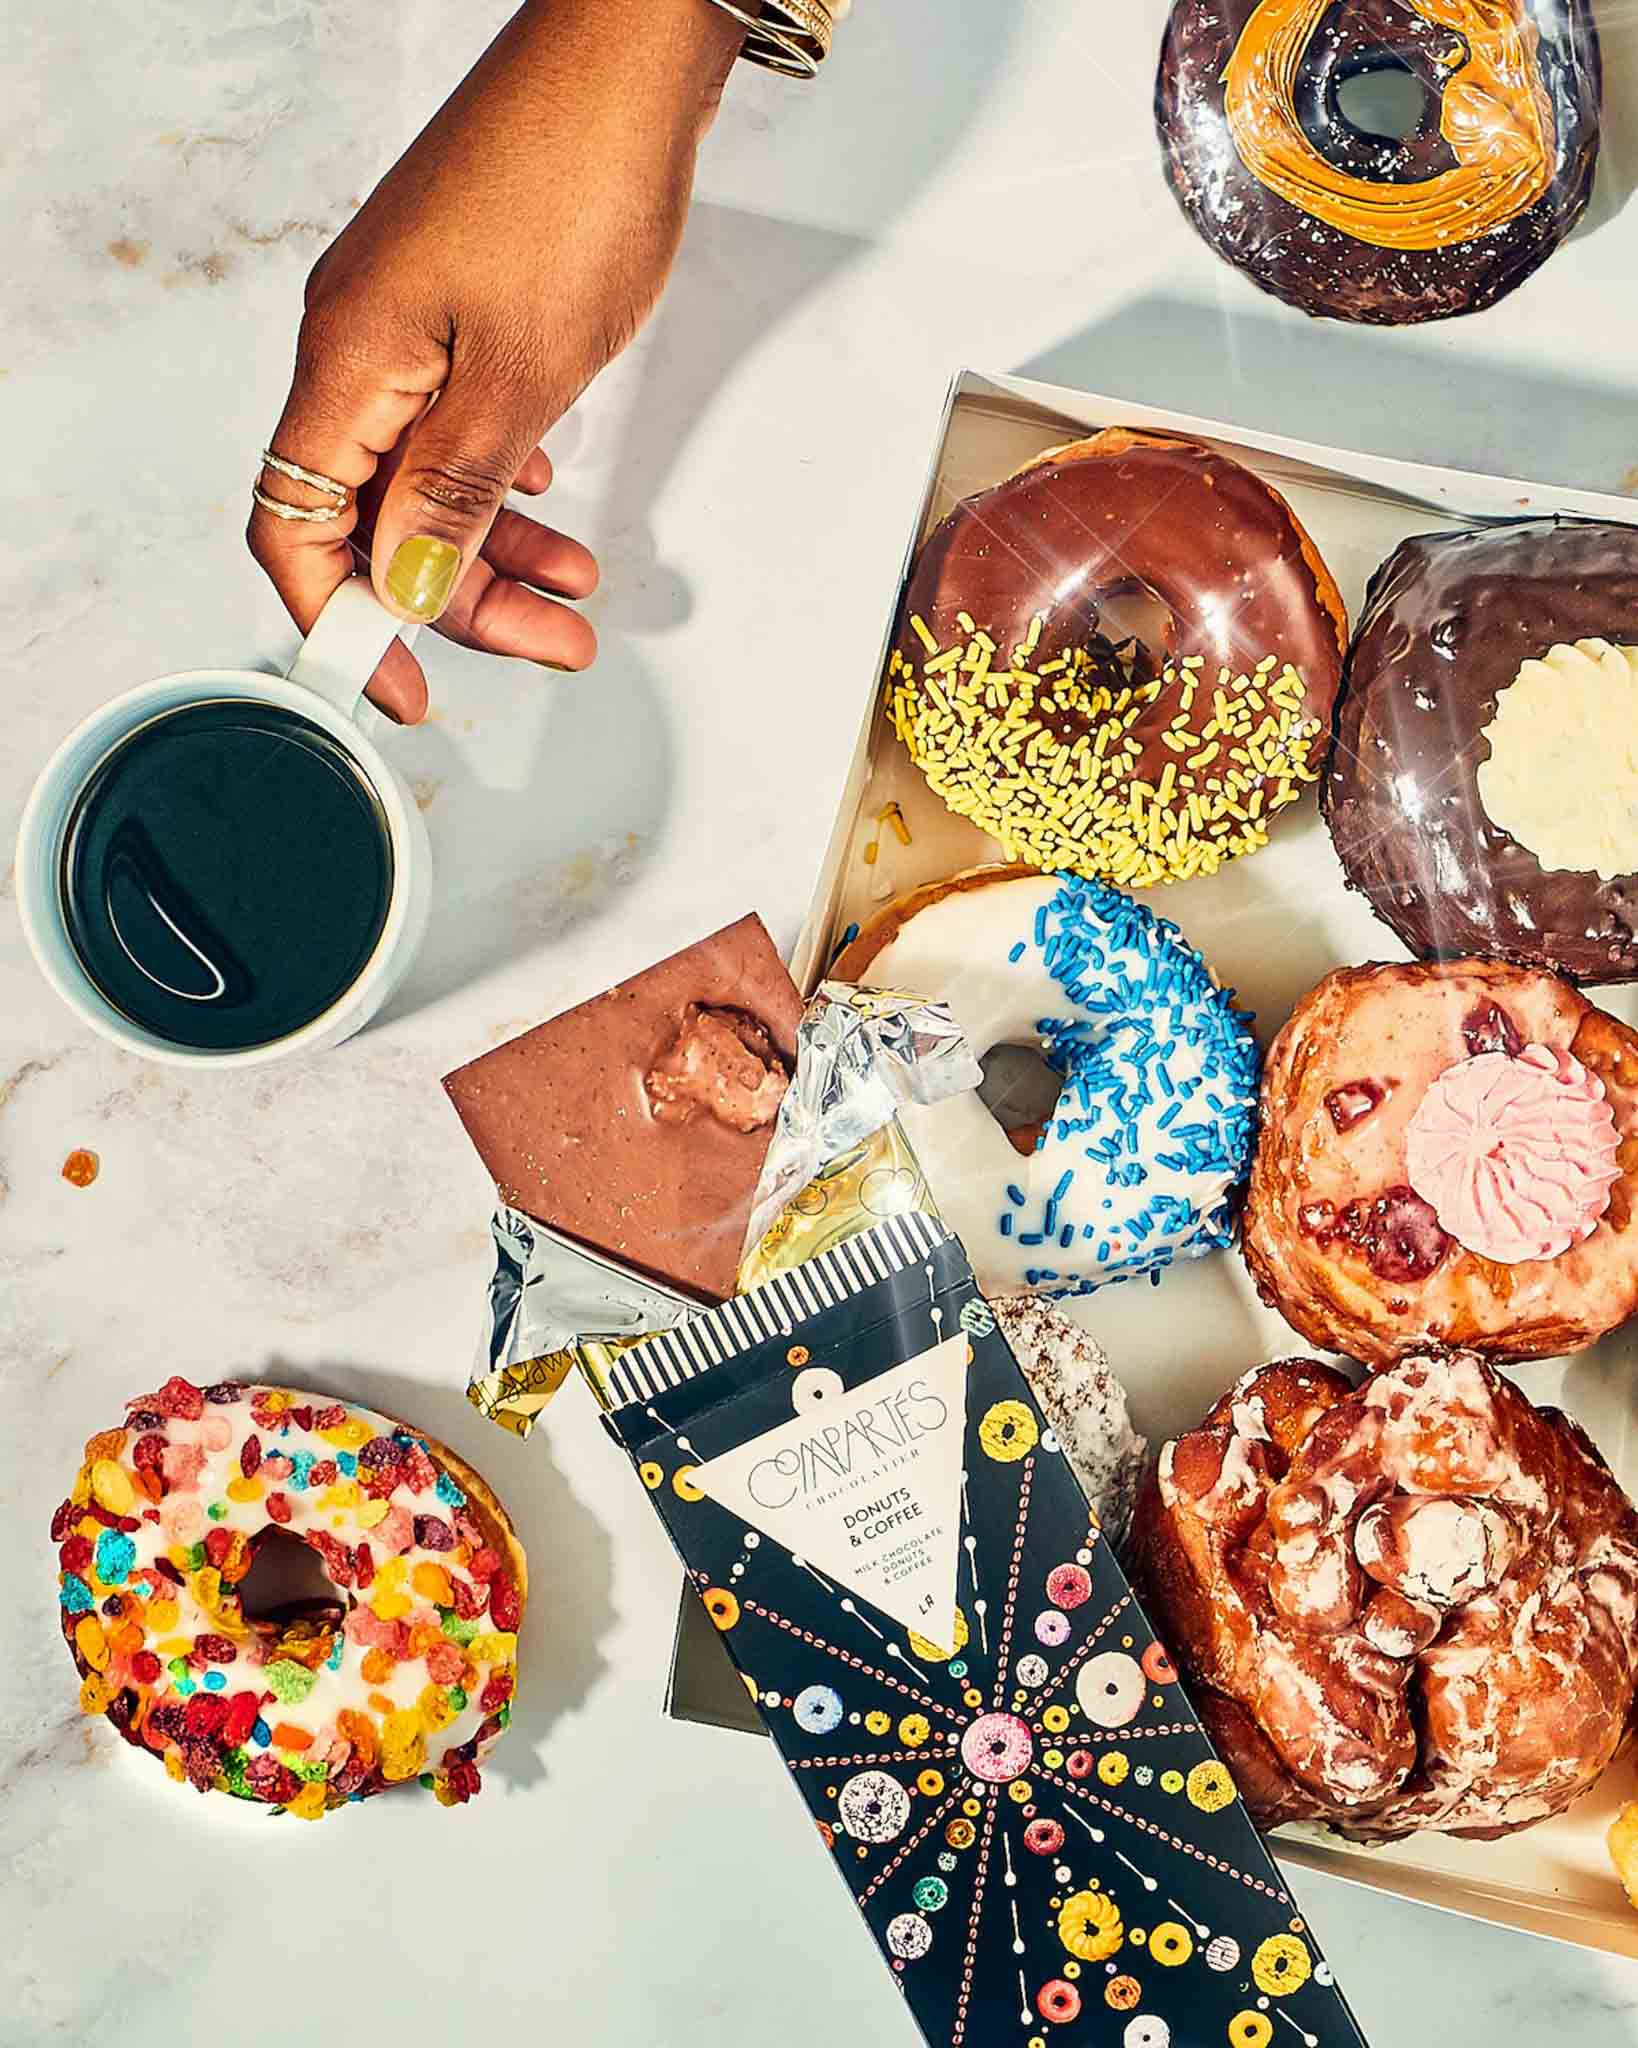 Overhead view of a box of donuts, a hand holding a cup of coffee, and the Coffee and Donuts Gourmet Chocolate Bar by Compartes